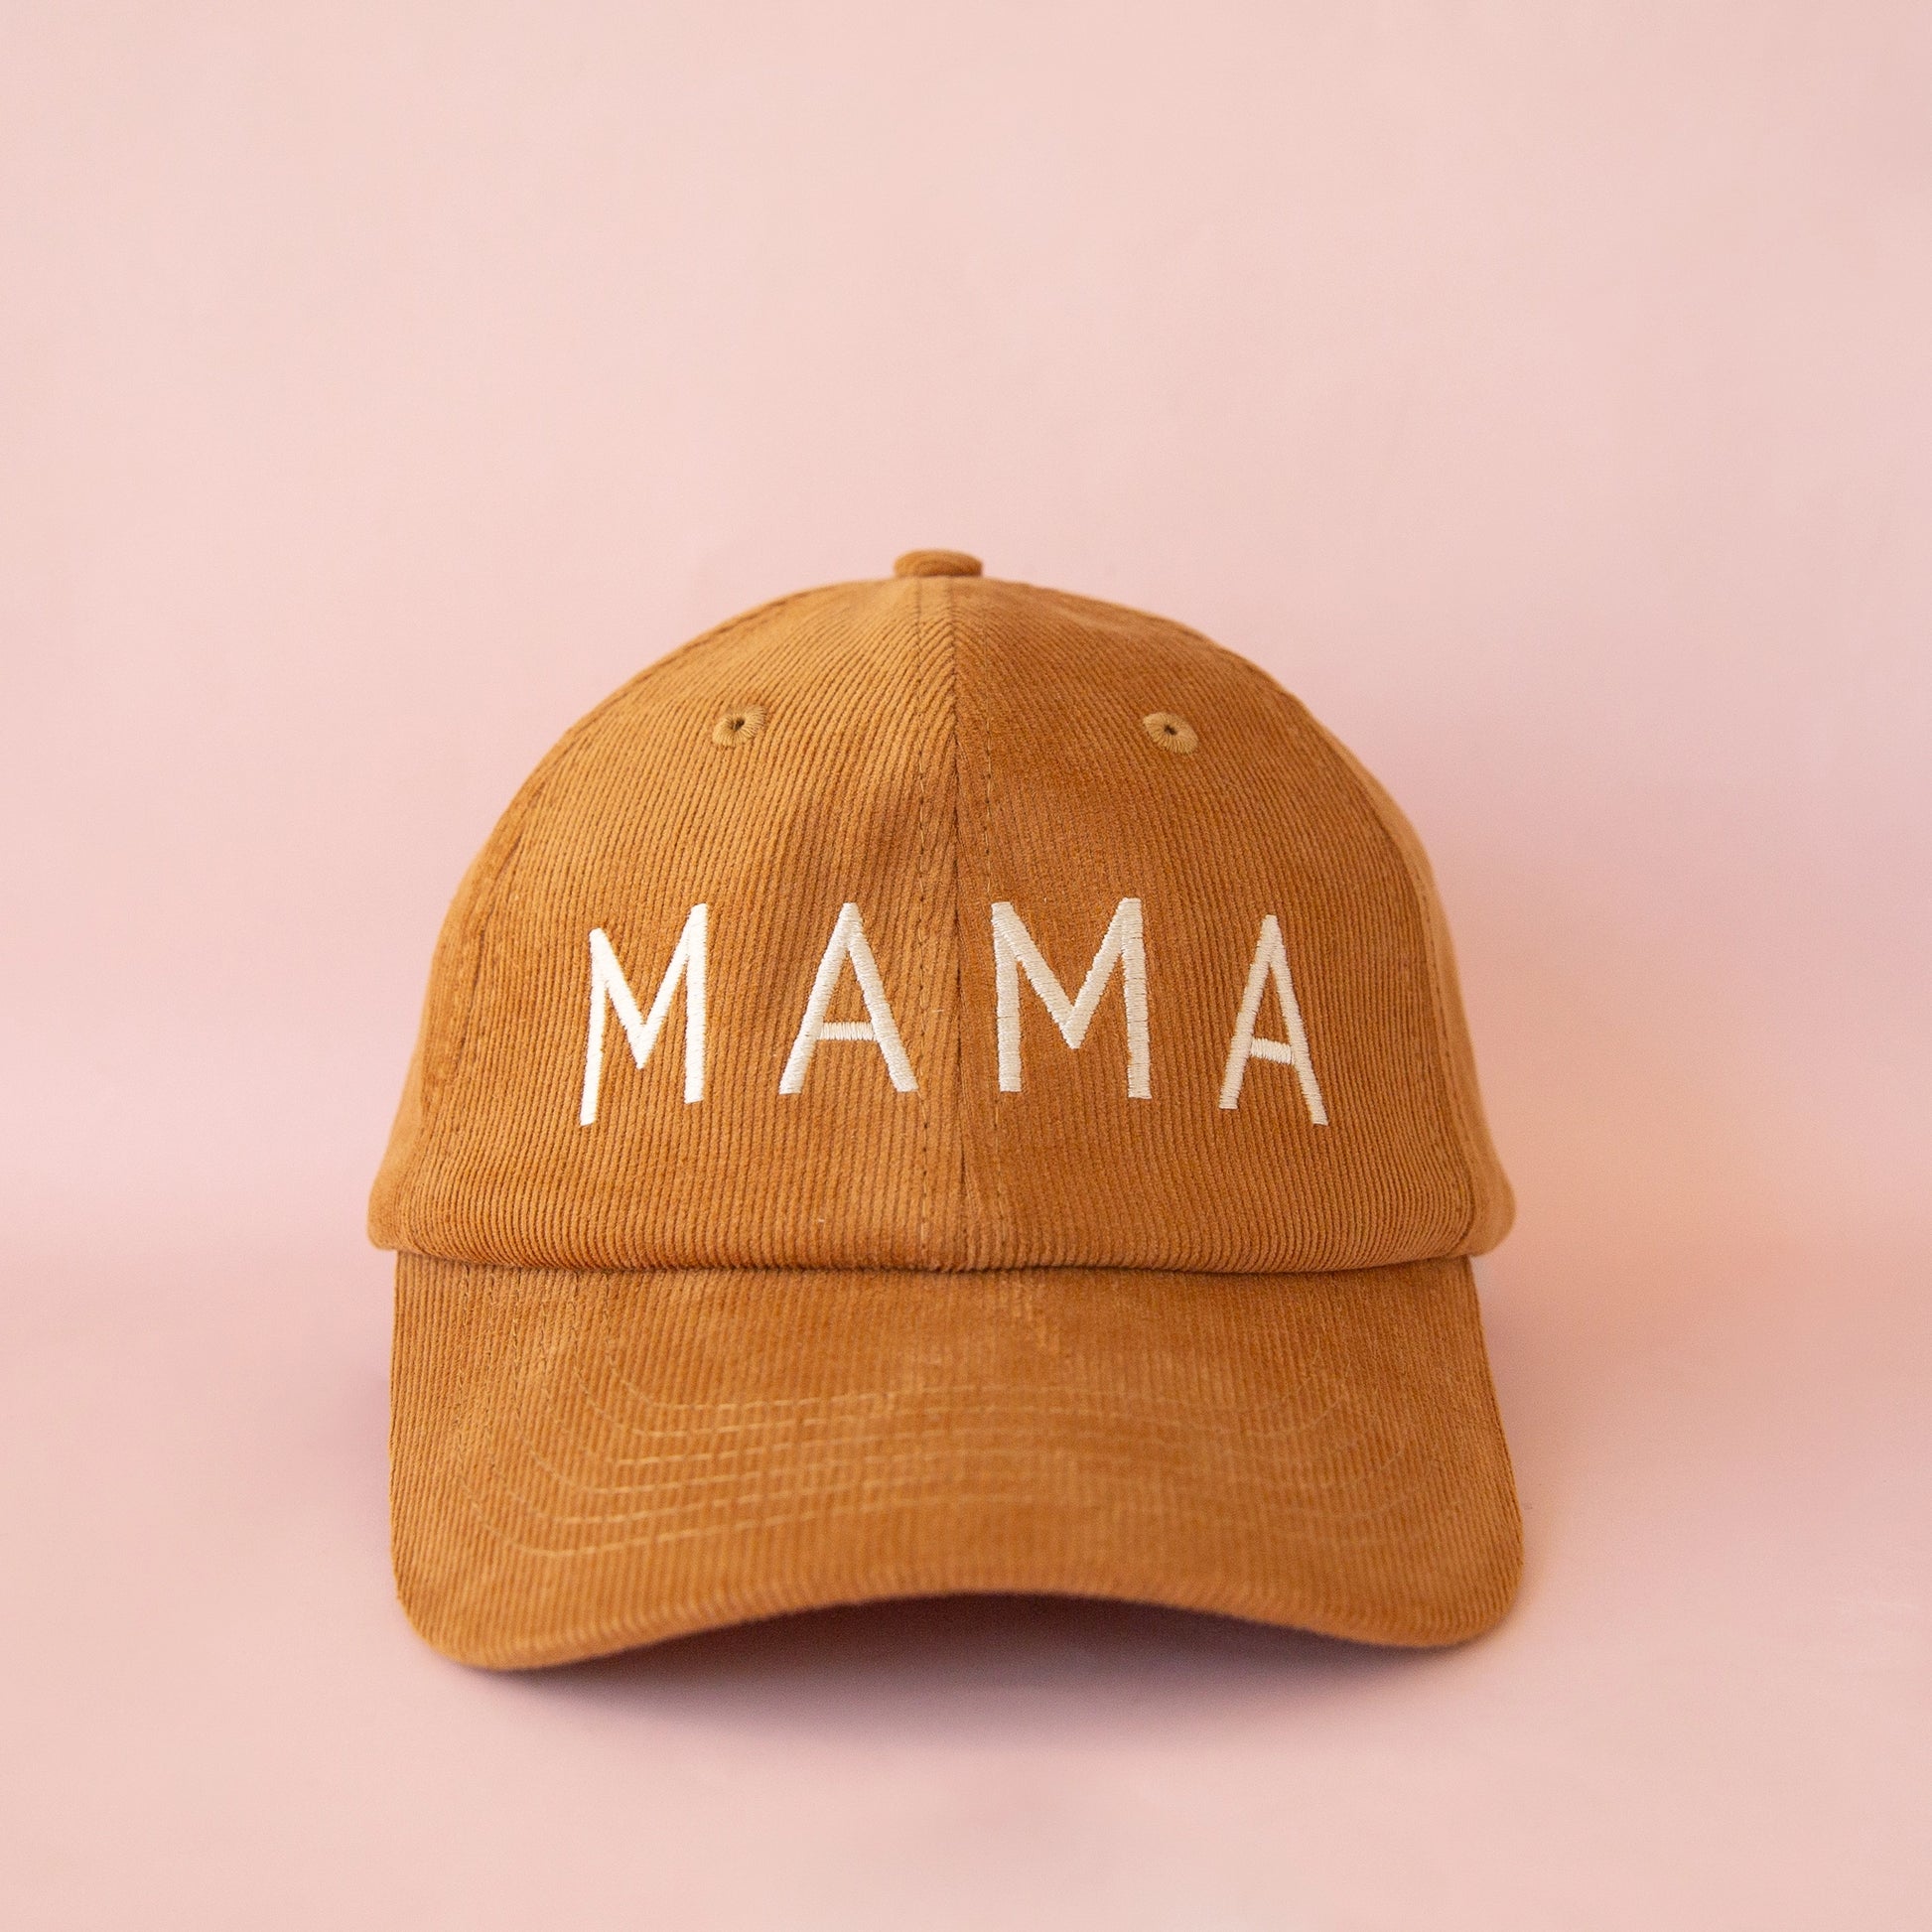 On a pink background is a toffee colored corduroy baseball hat with white embroidered text on the front that reads, "MAMA". 